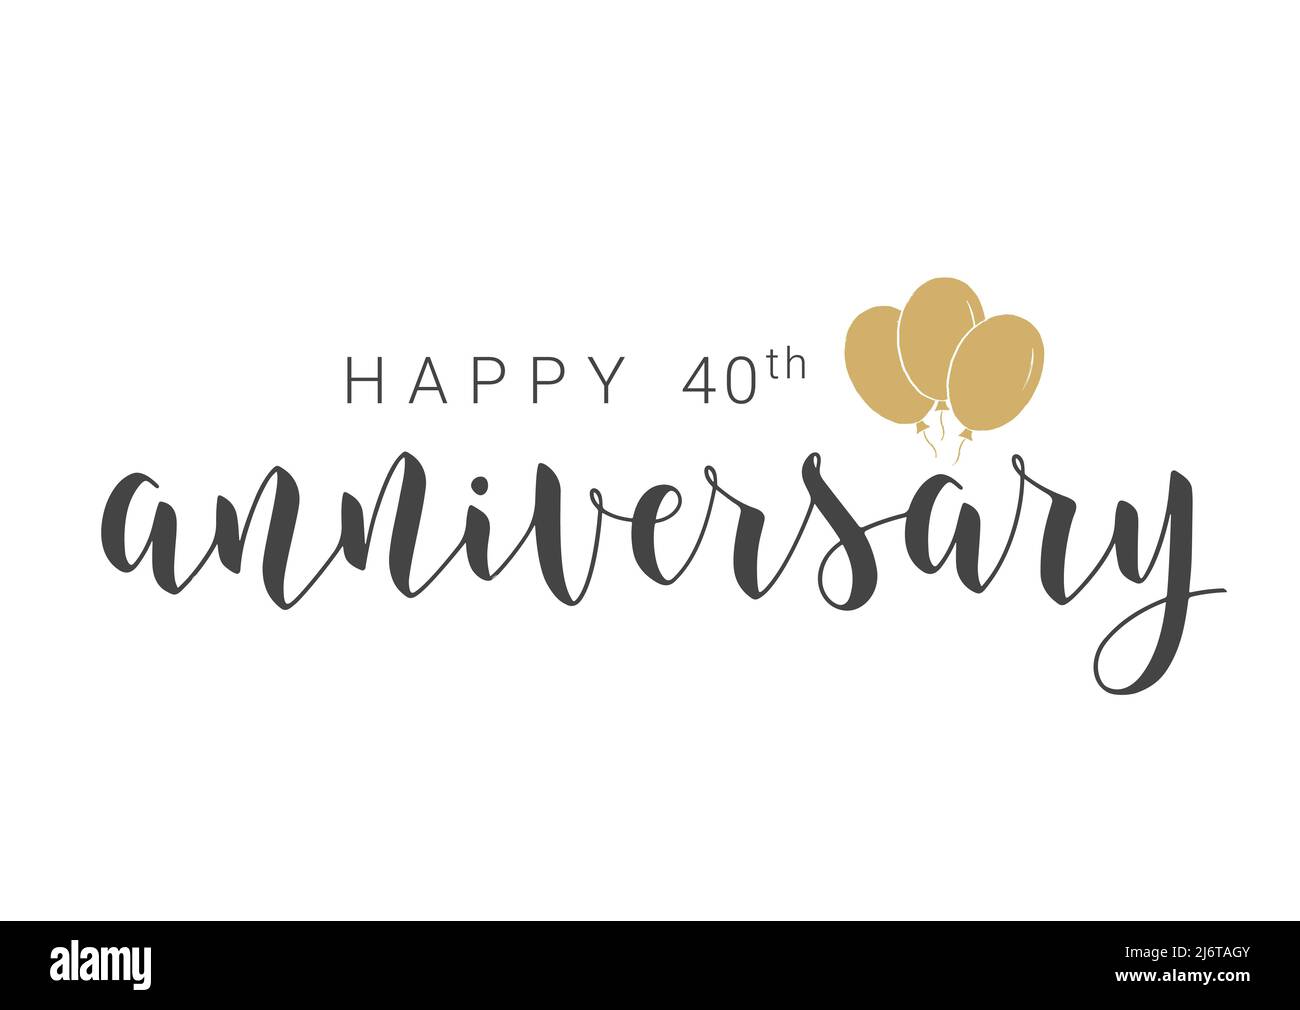 Happy Anniversary Images – Browse 19,302 Stock Photos, Vectors